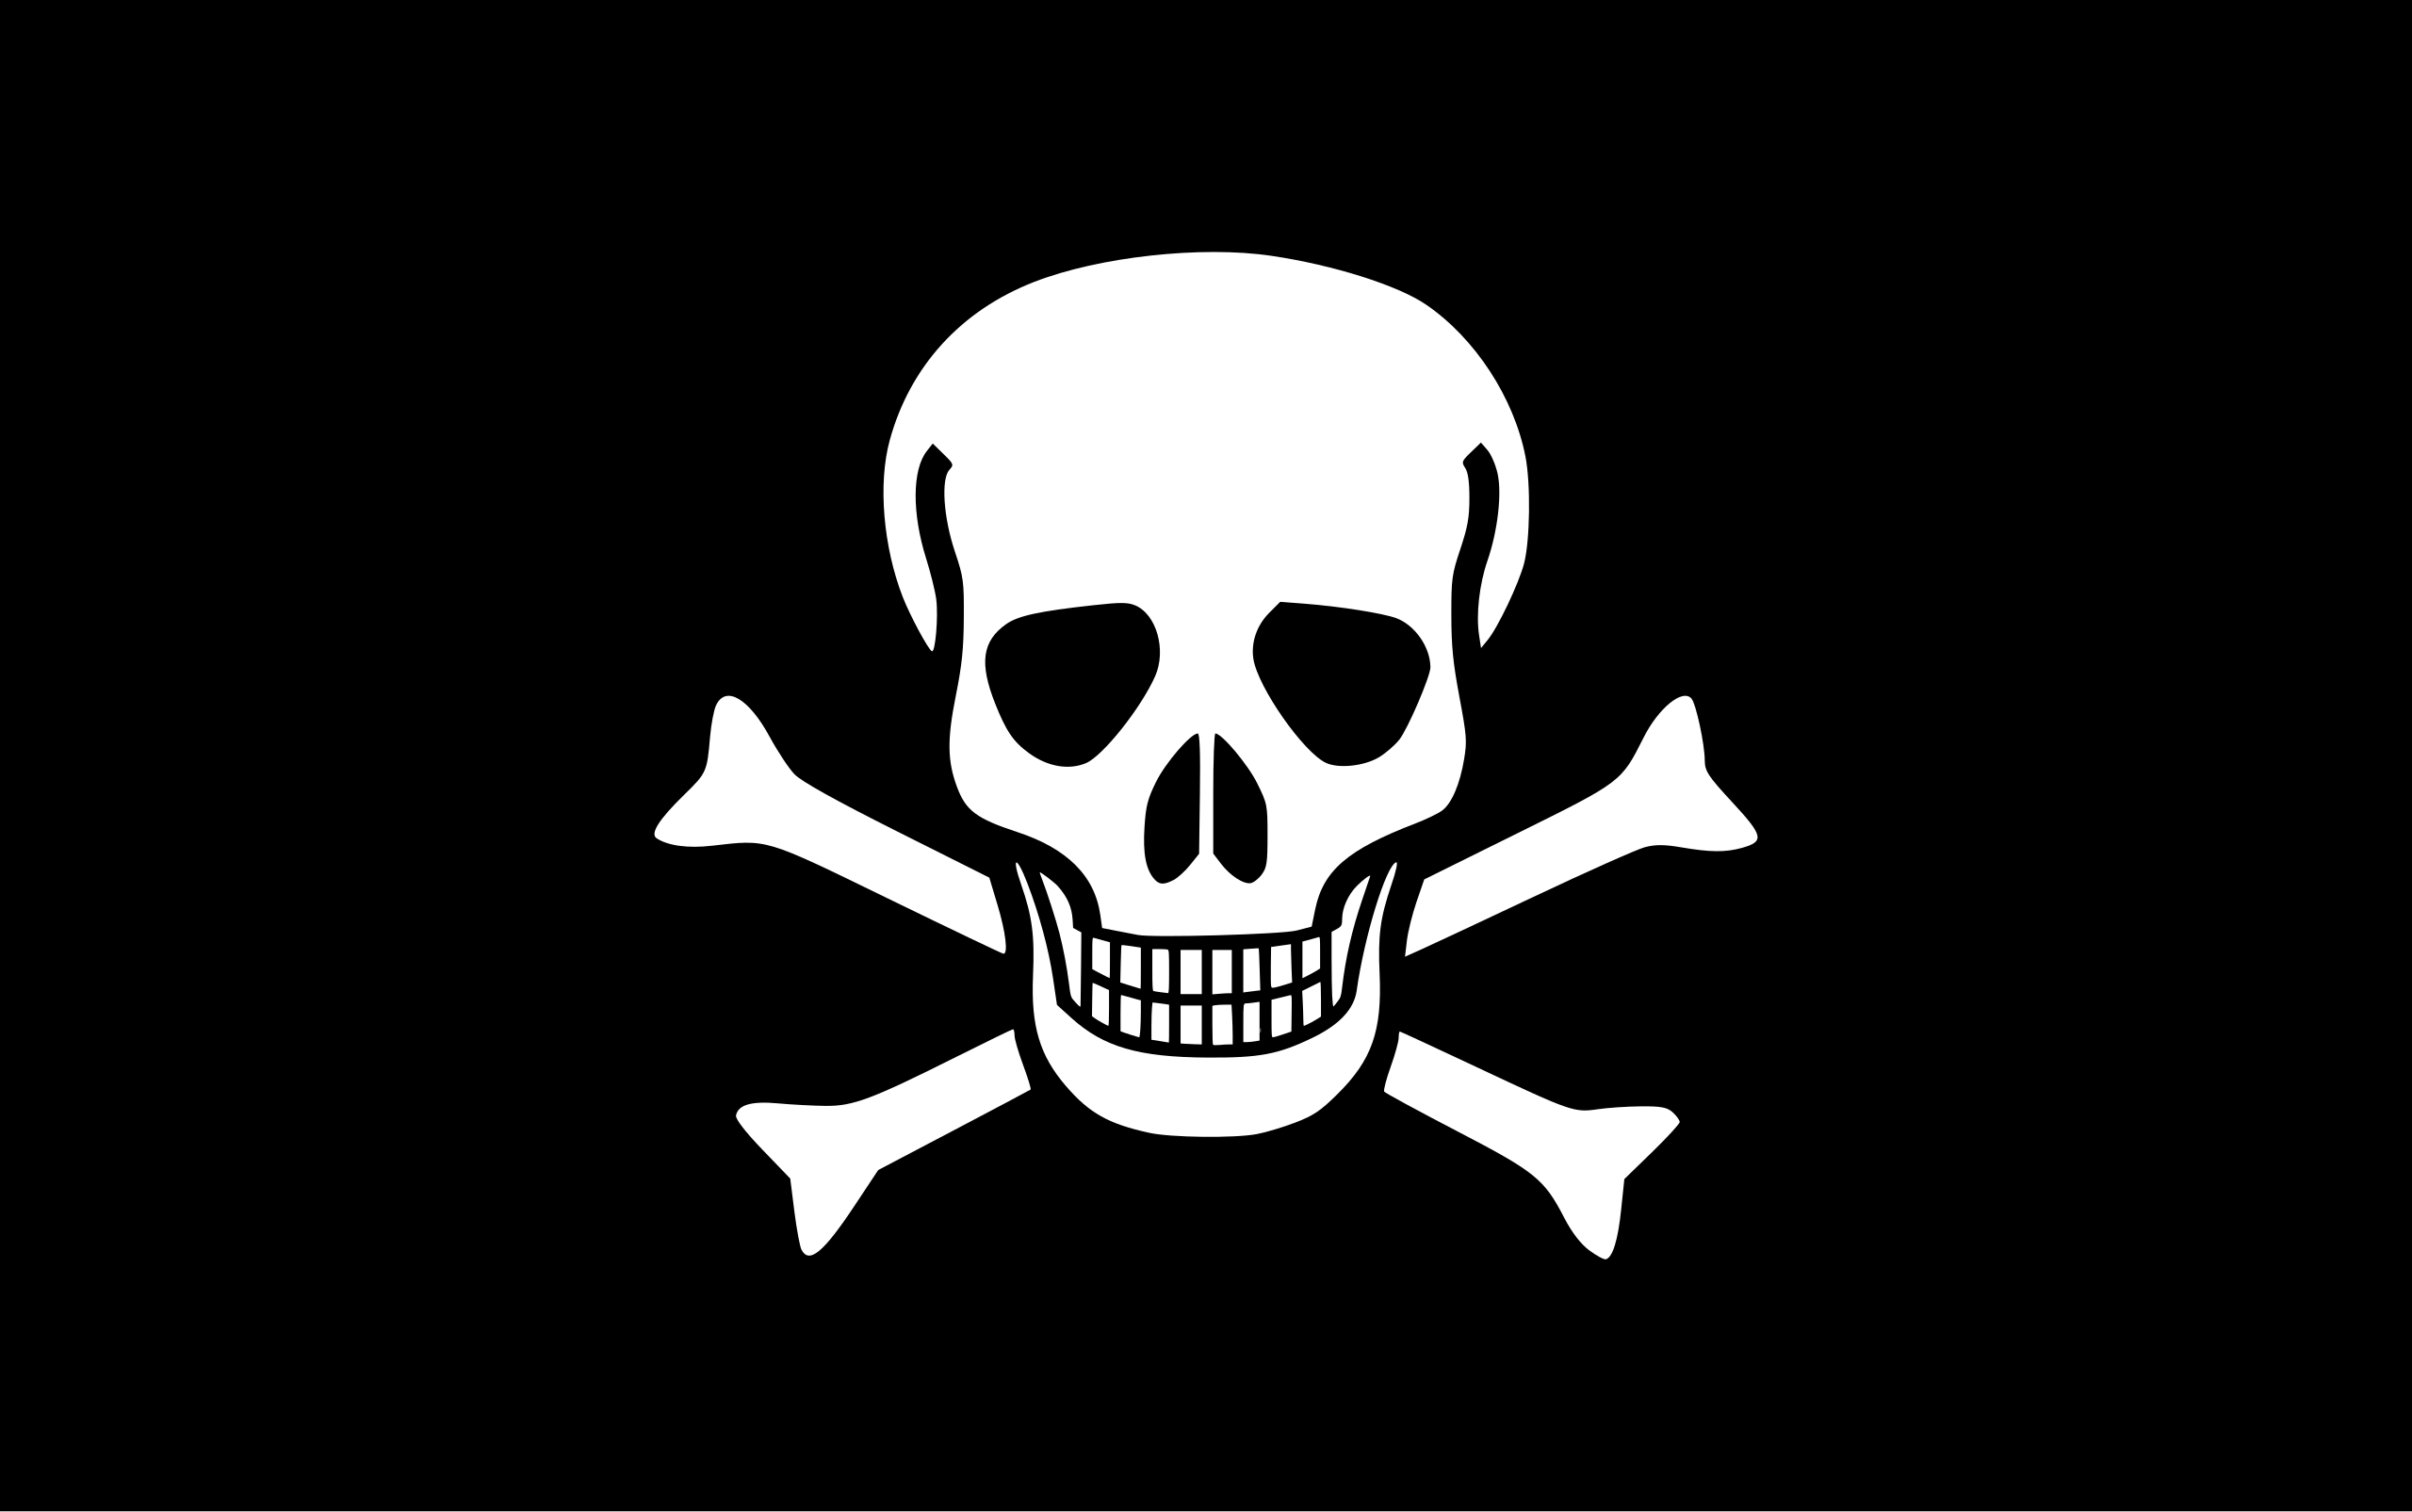 https://upload.wikimedia.org/wikipedia/commons/thumb/6/6c/Pirate_Flag.svg/2560px-Pirate_Flag.svg.png